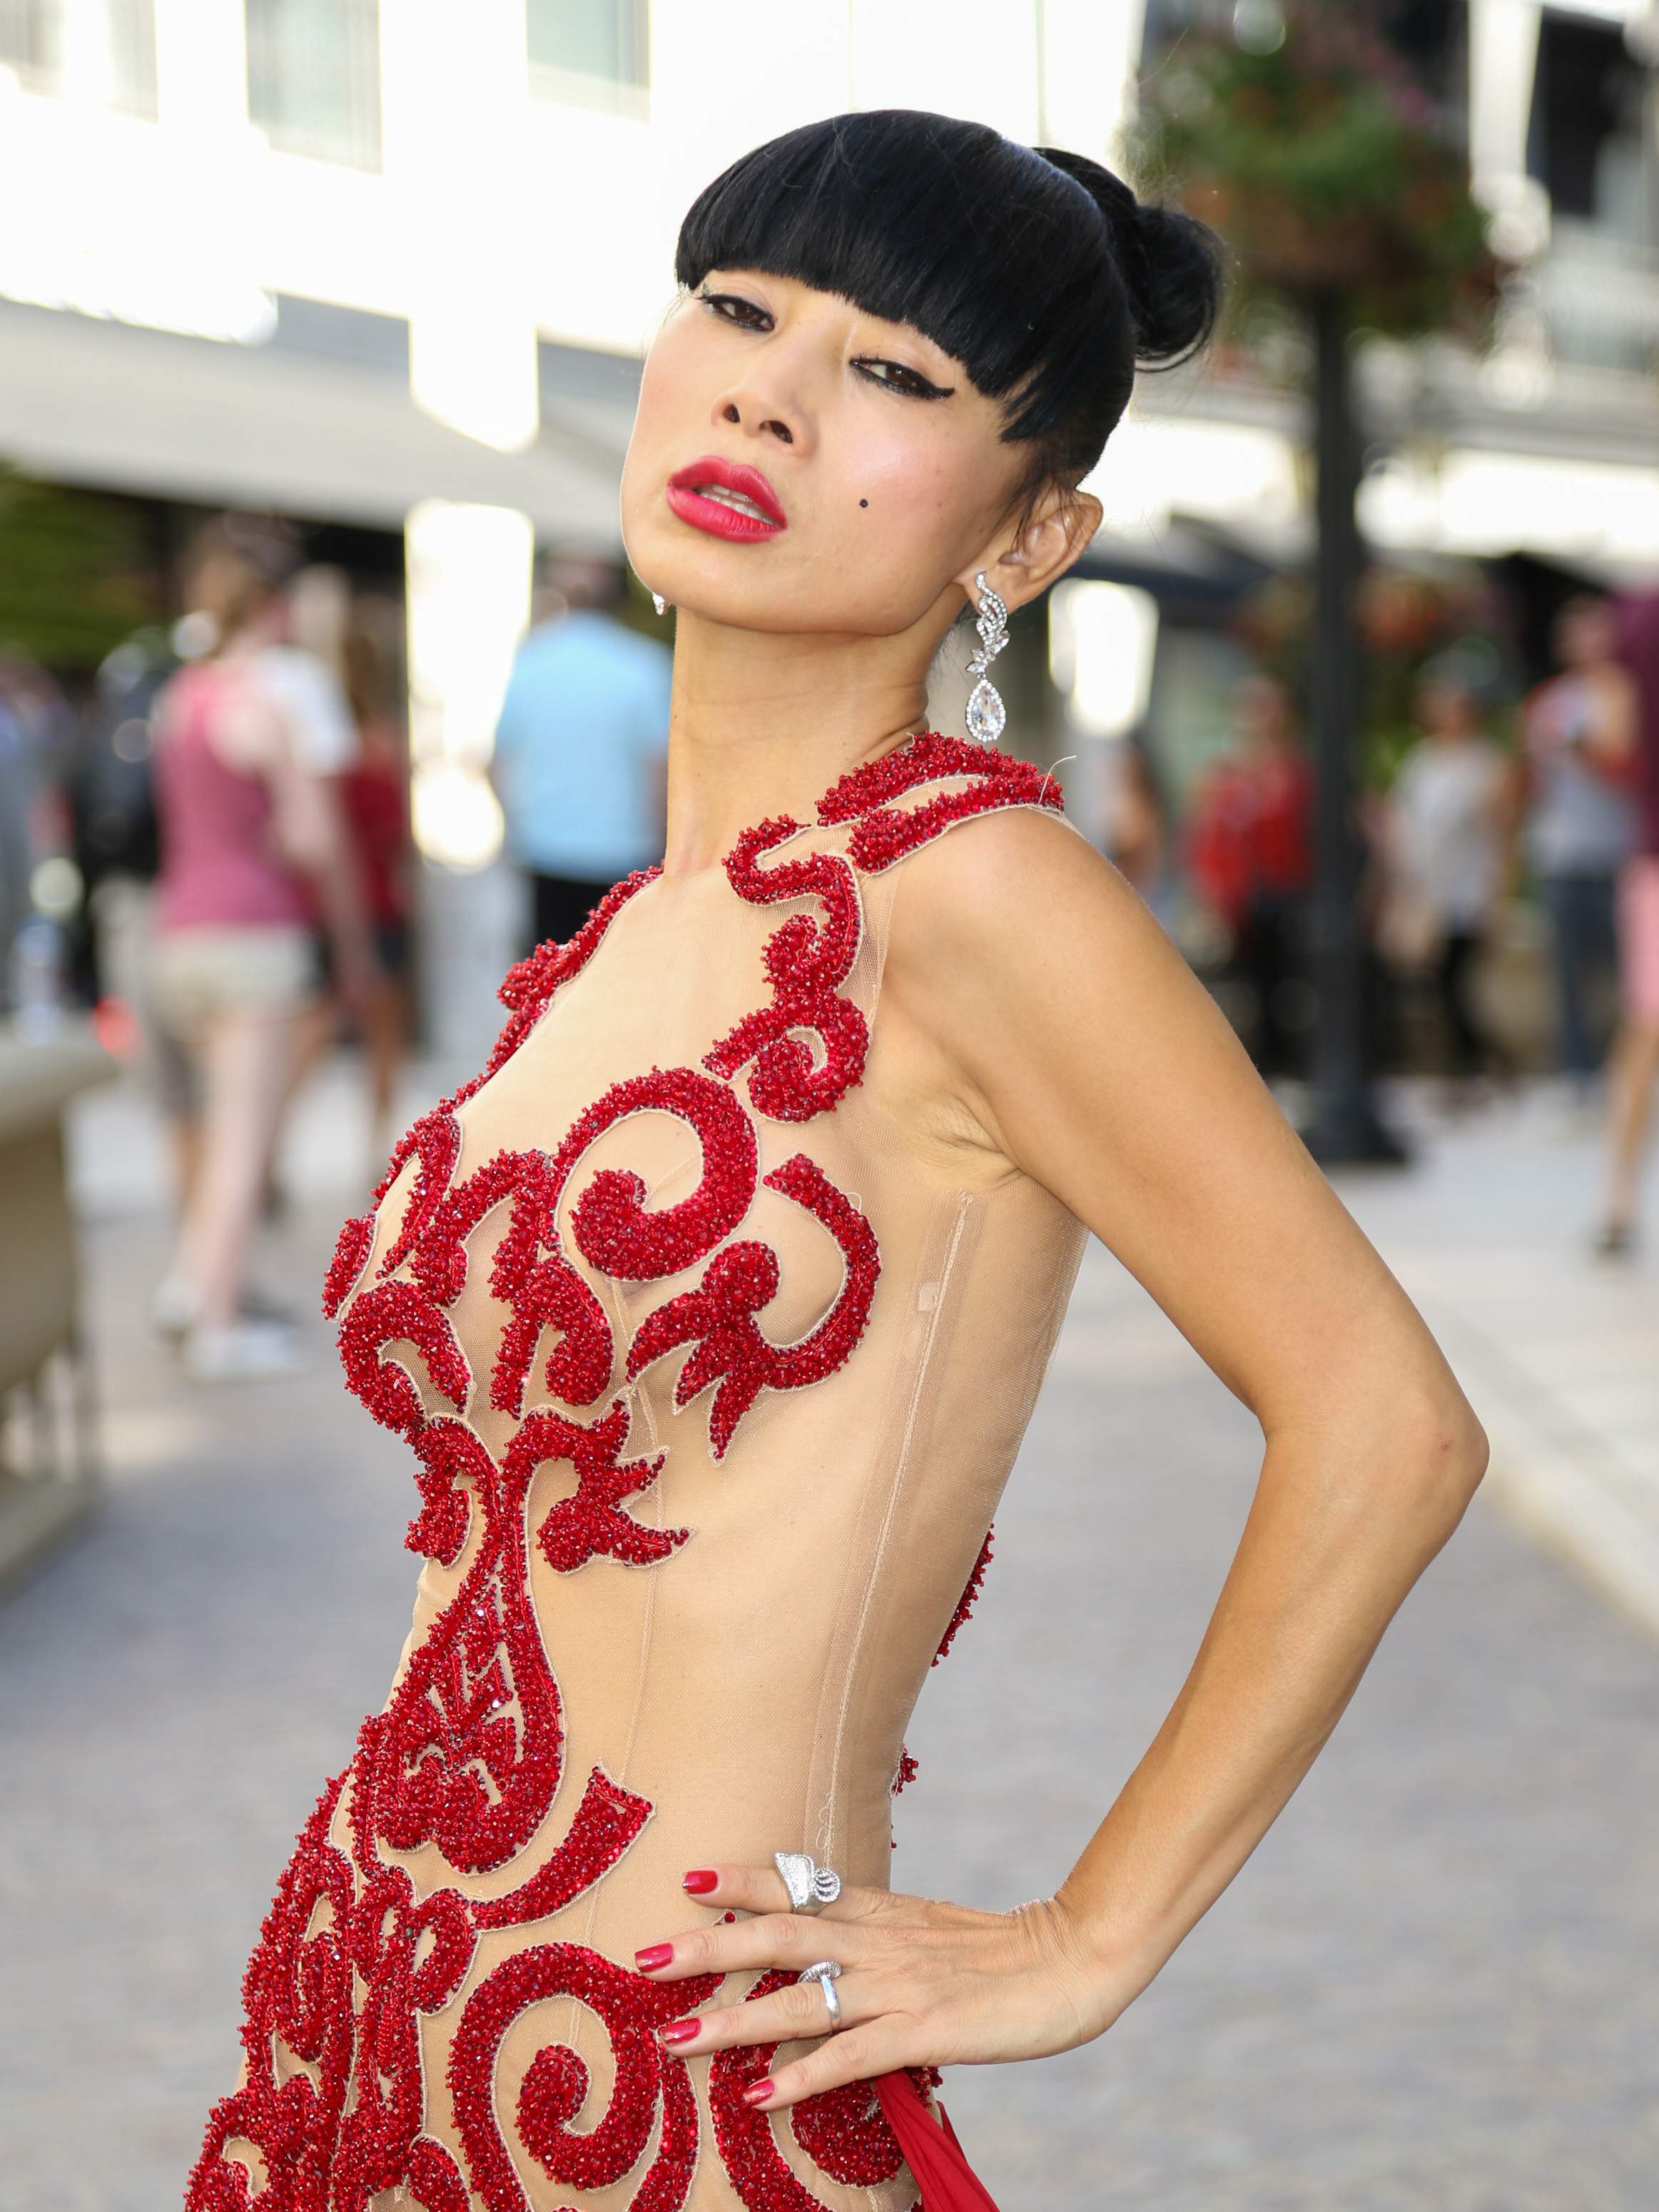 bai-ling-pantyless-and-nipples-in-see-through-outfit-03.jpg